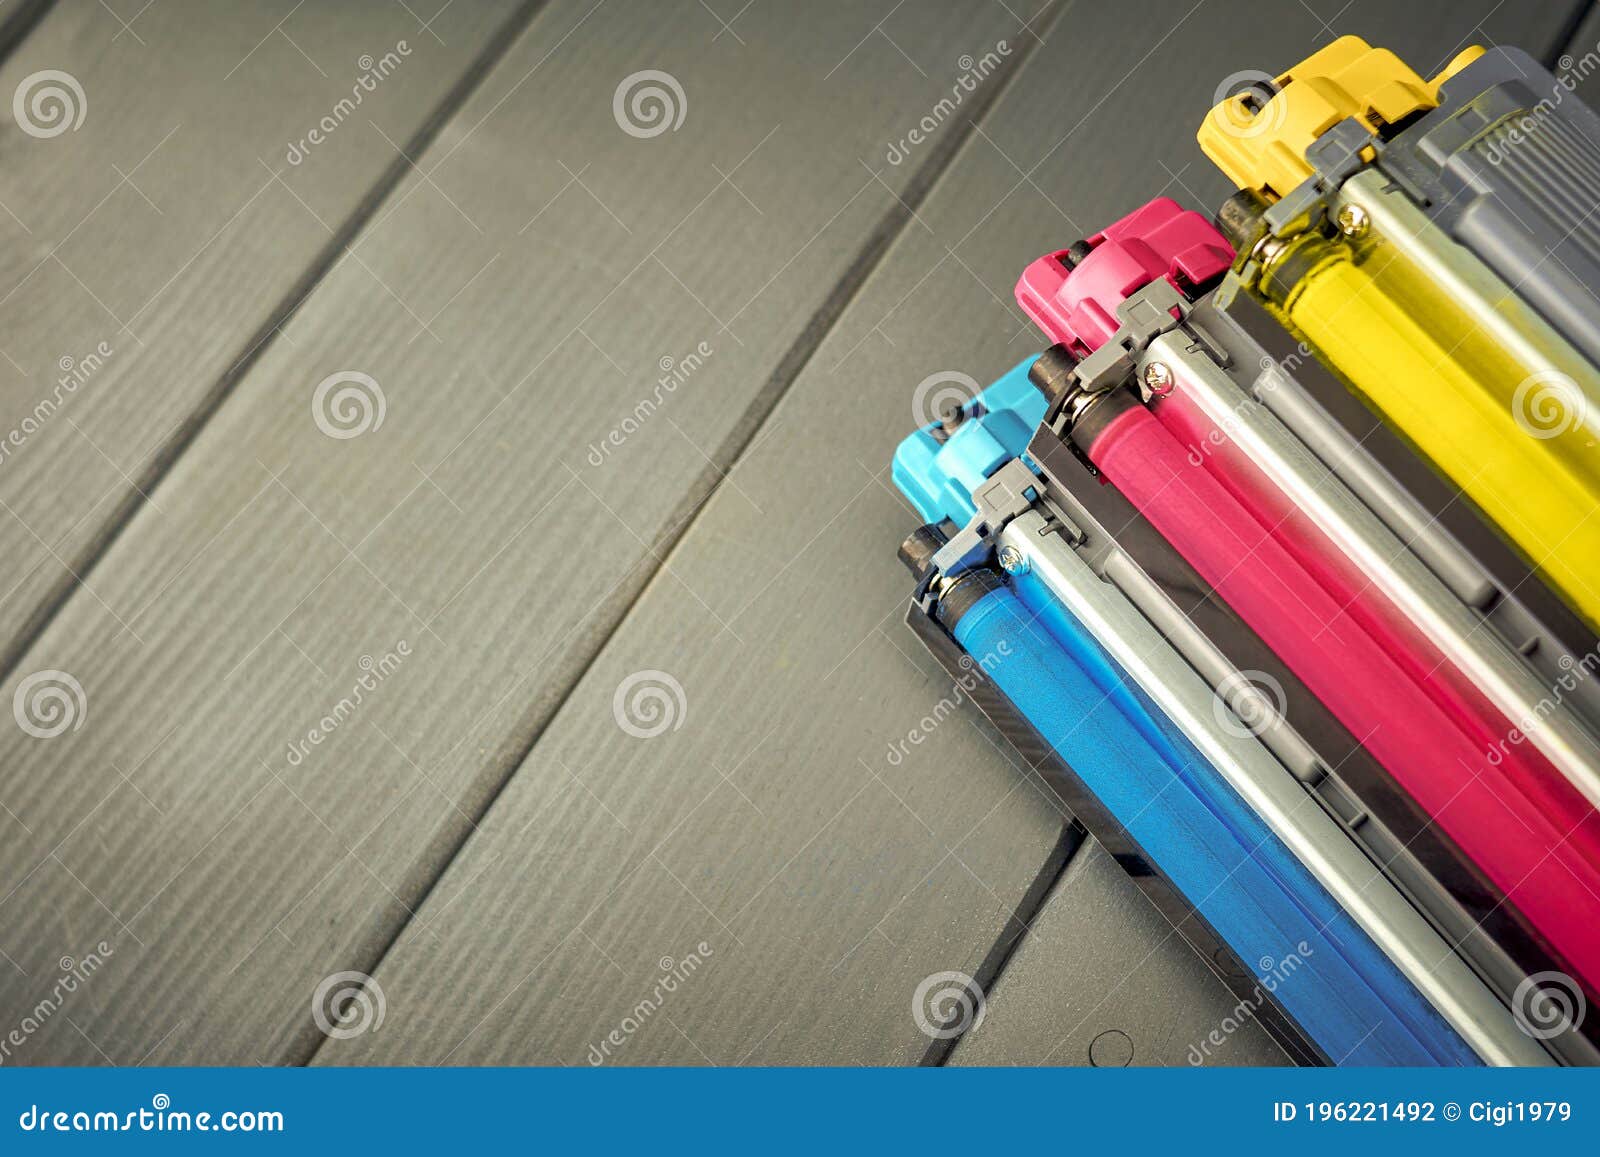 three used toner cartridges in a color laser printer on gray wooden background for recycling